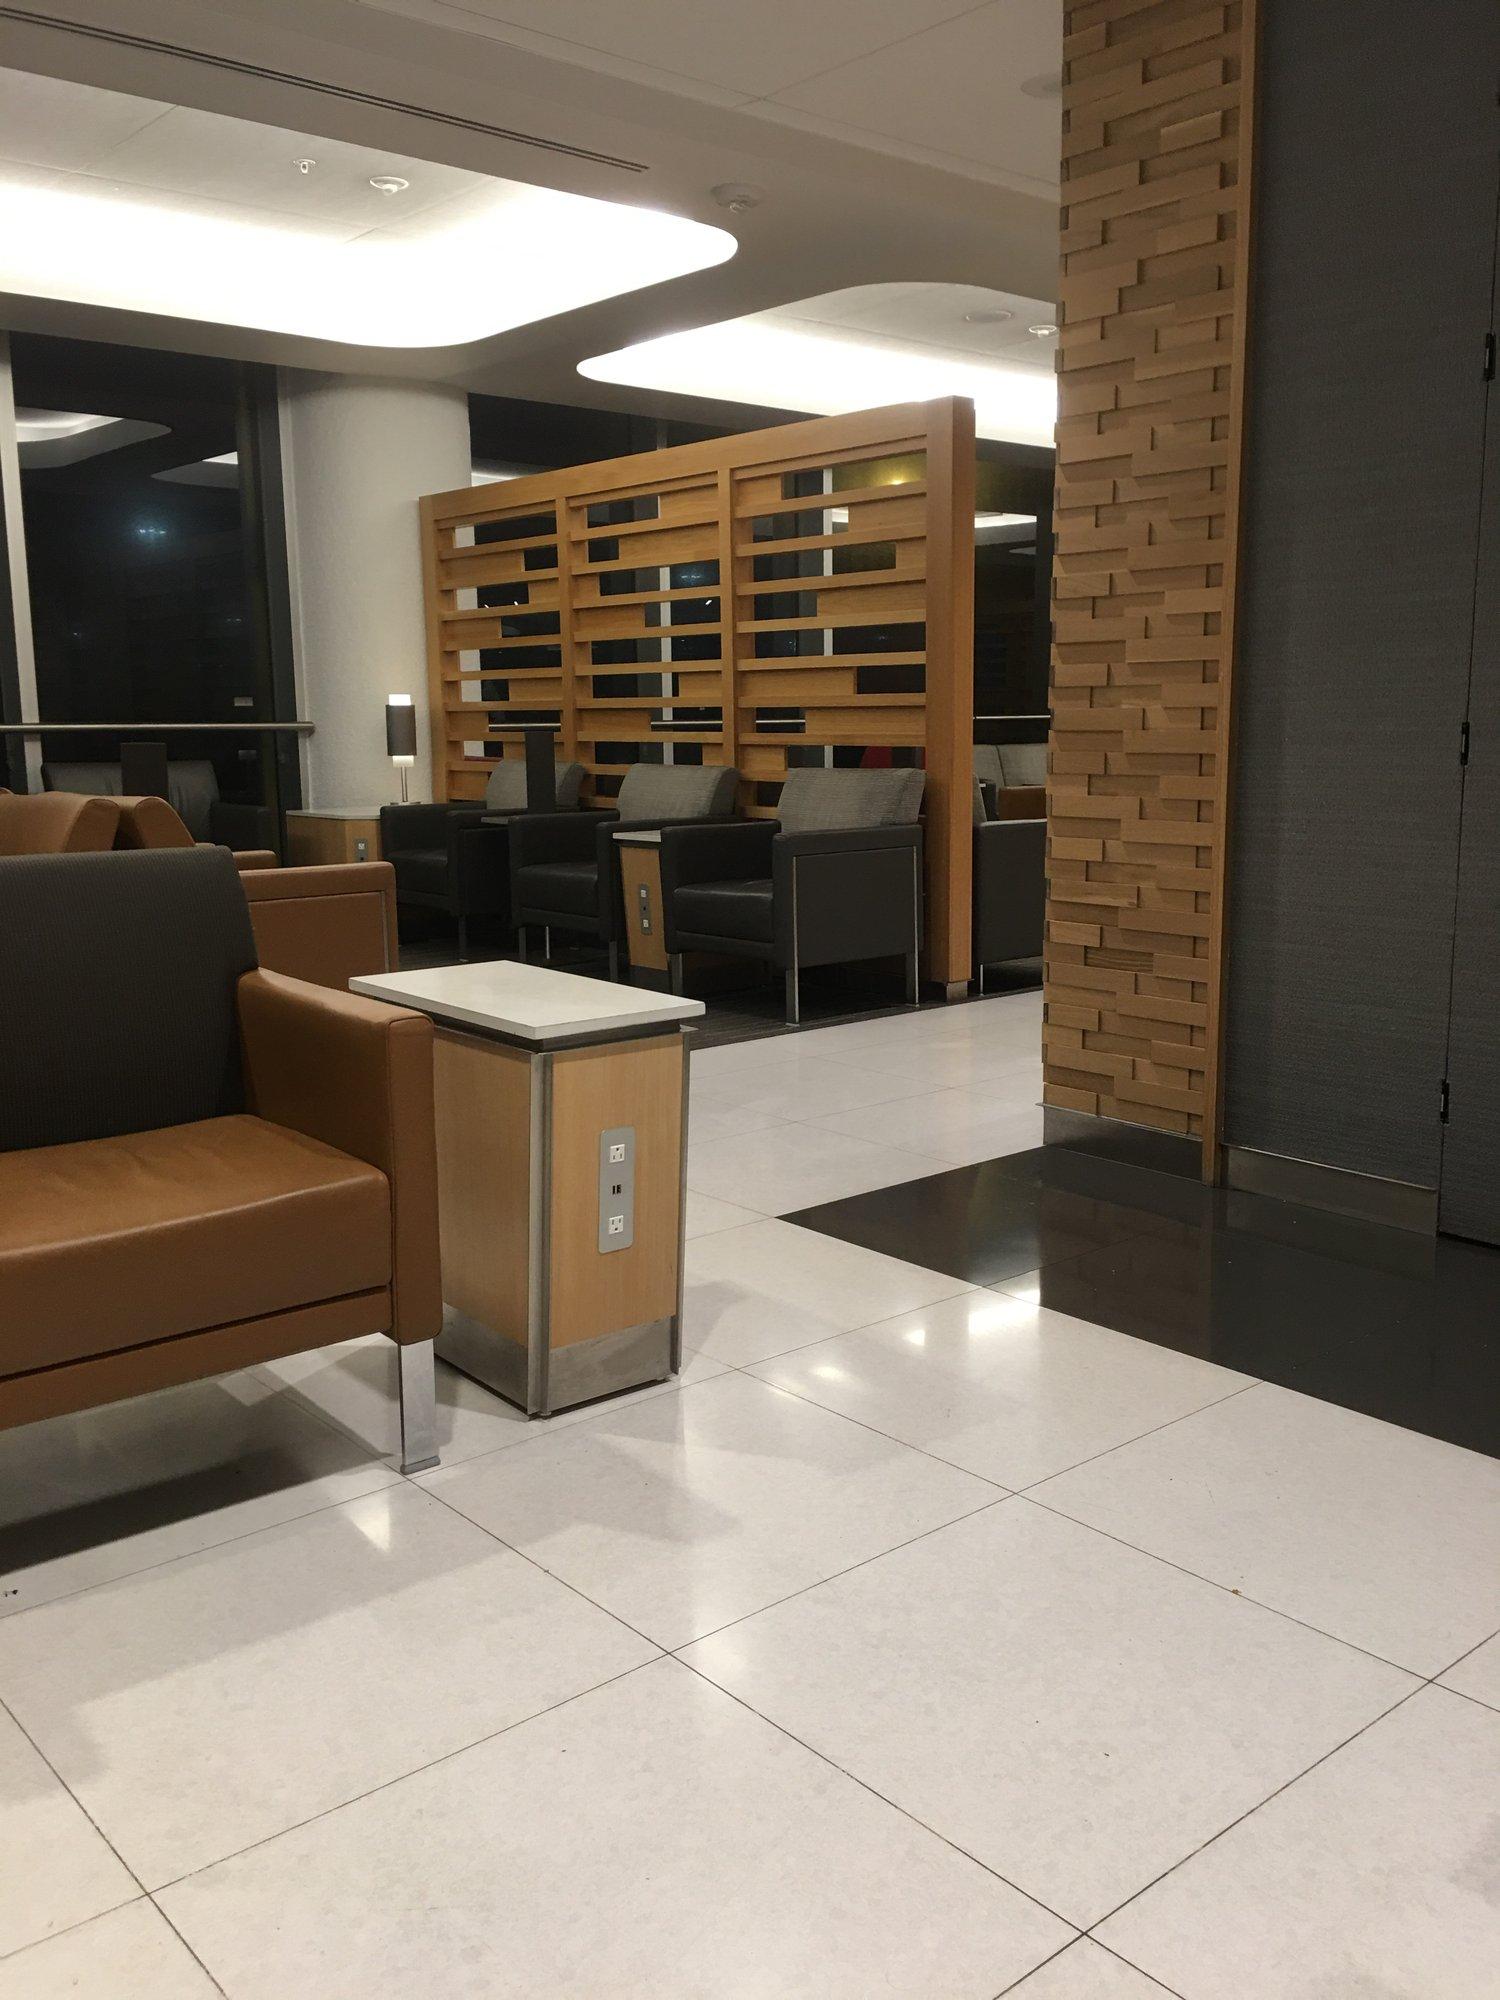 American Airlines Admirals Club (Gate D15) image 8 of 25